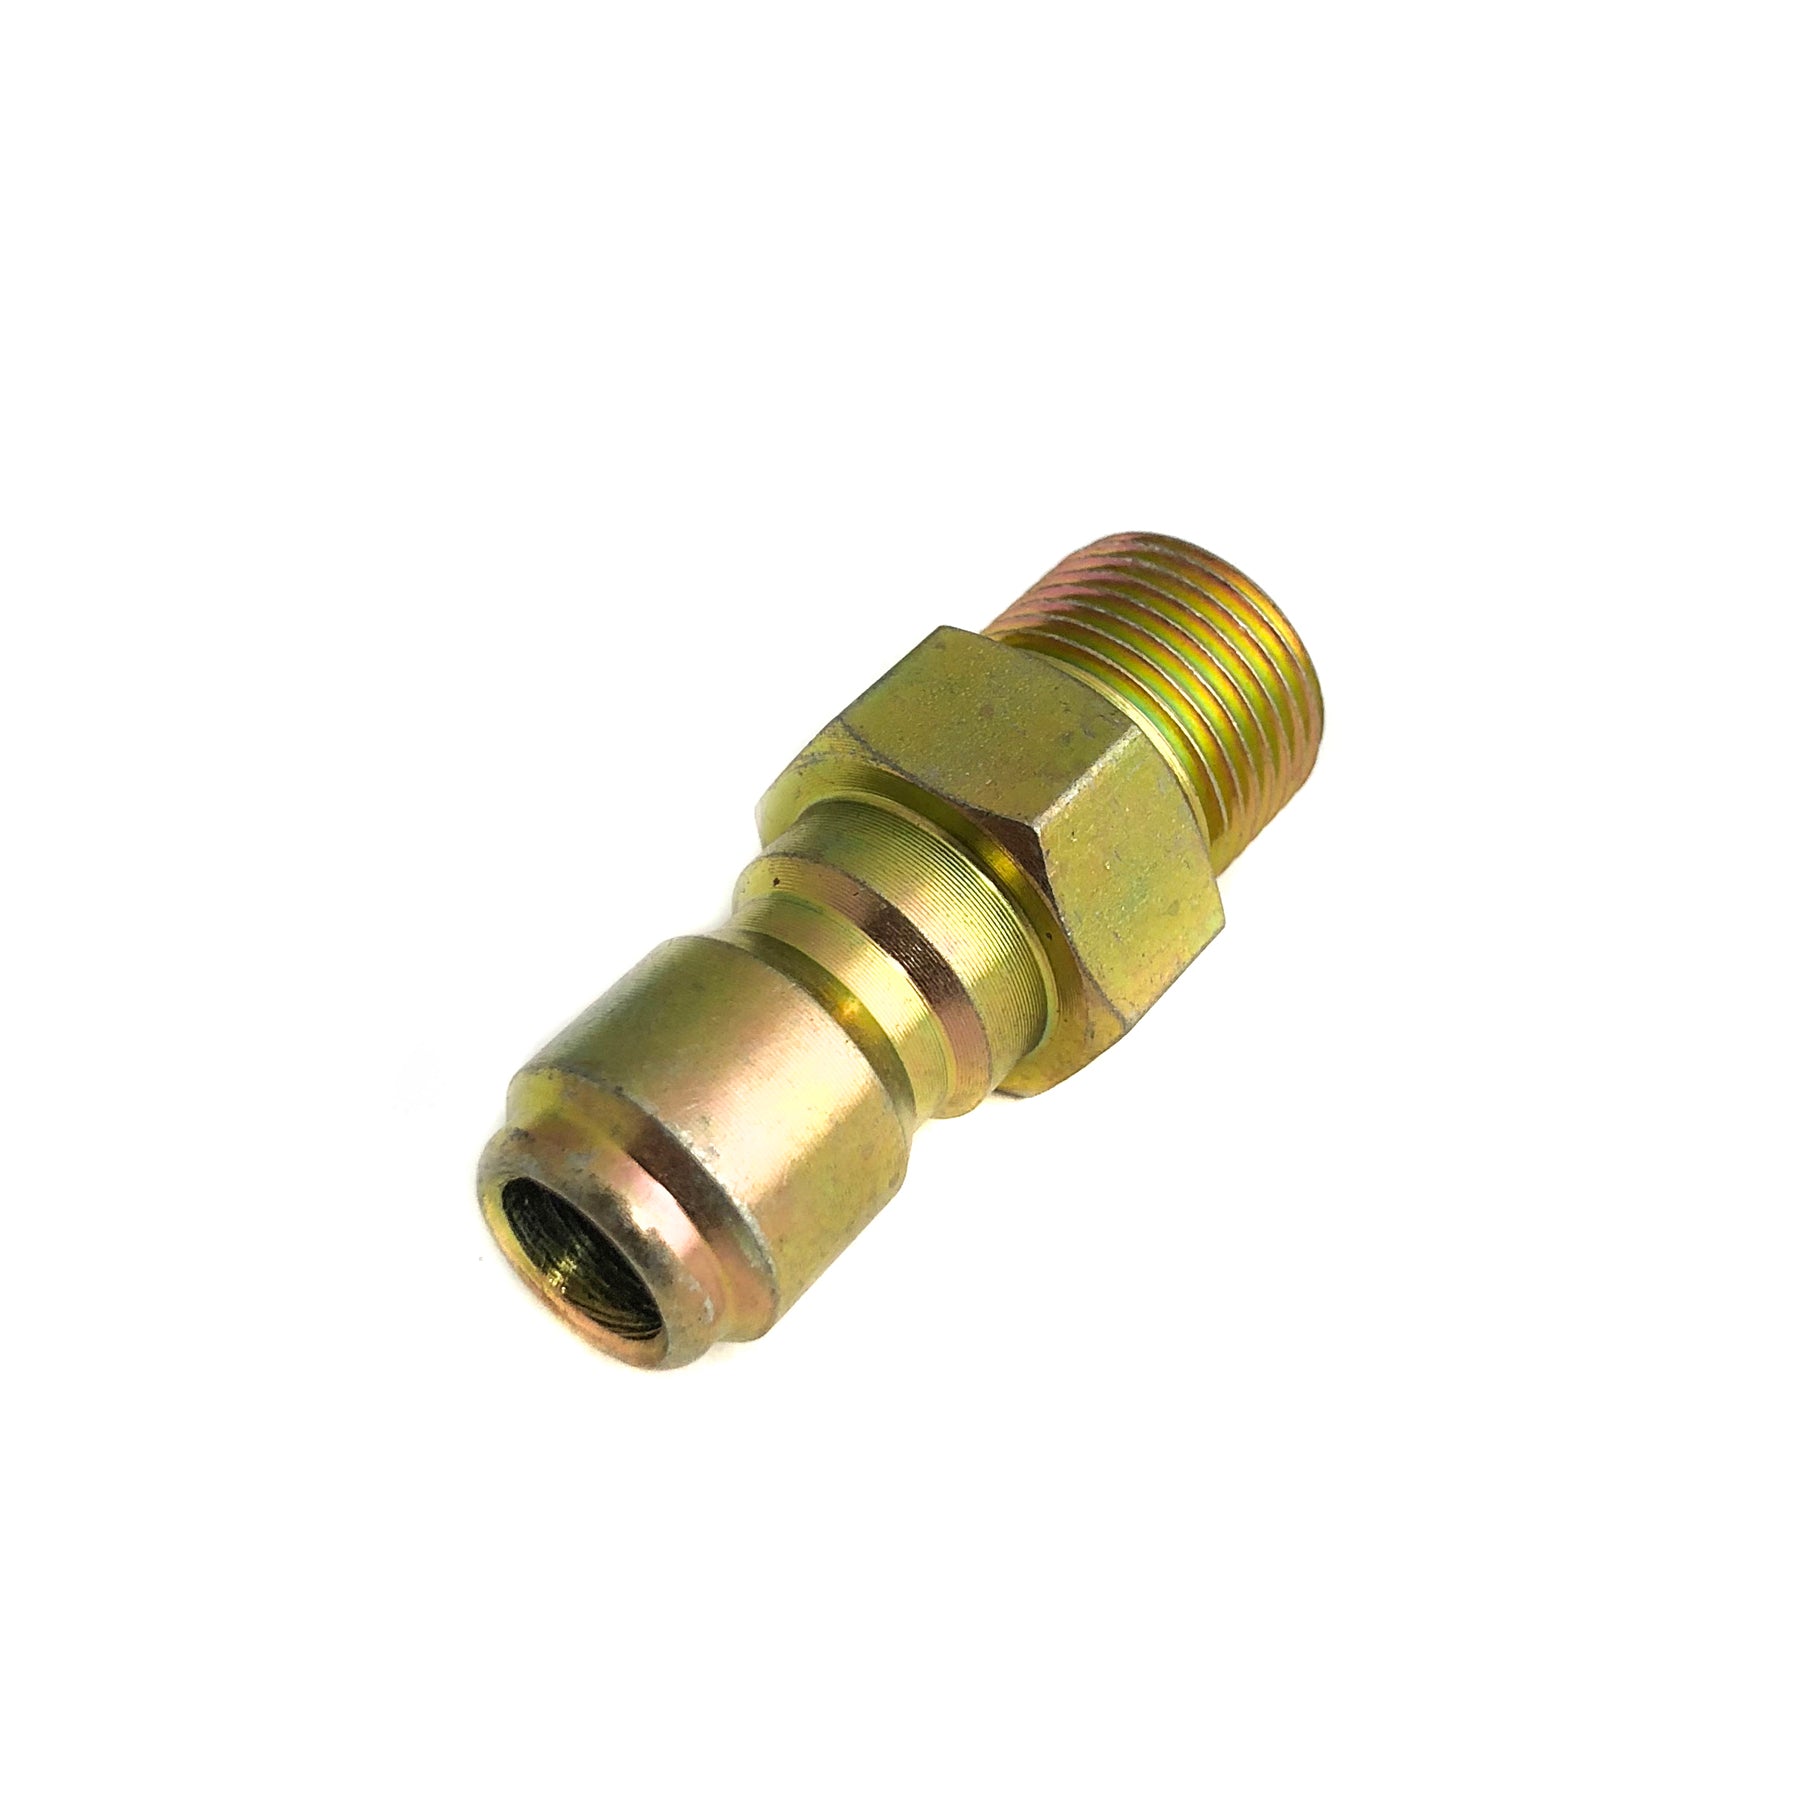 Pressure Washer Hose Fittings Brass 3-8 quick disconnect plug x male thread